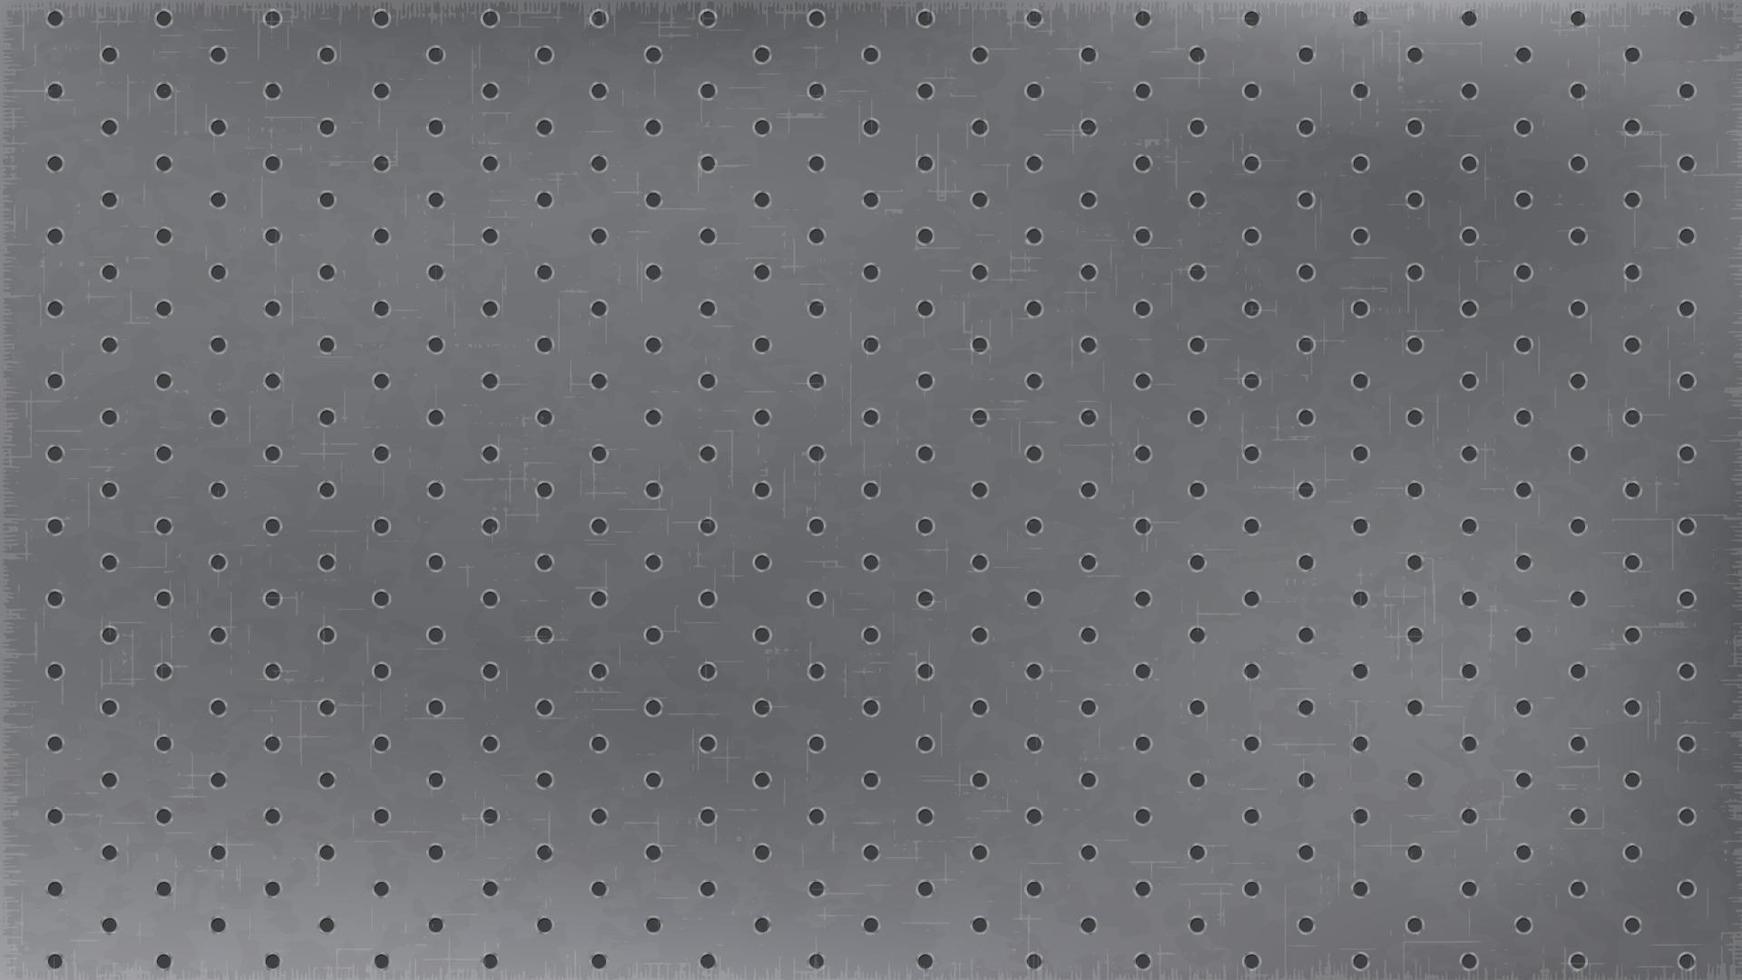 Stainless background dotted lines. Seamless monochrome light background carbon modern nickel brutal dotted lines design web vector geometric texture futuristic .